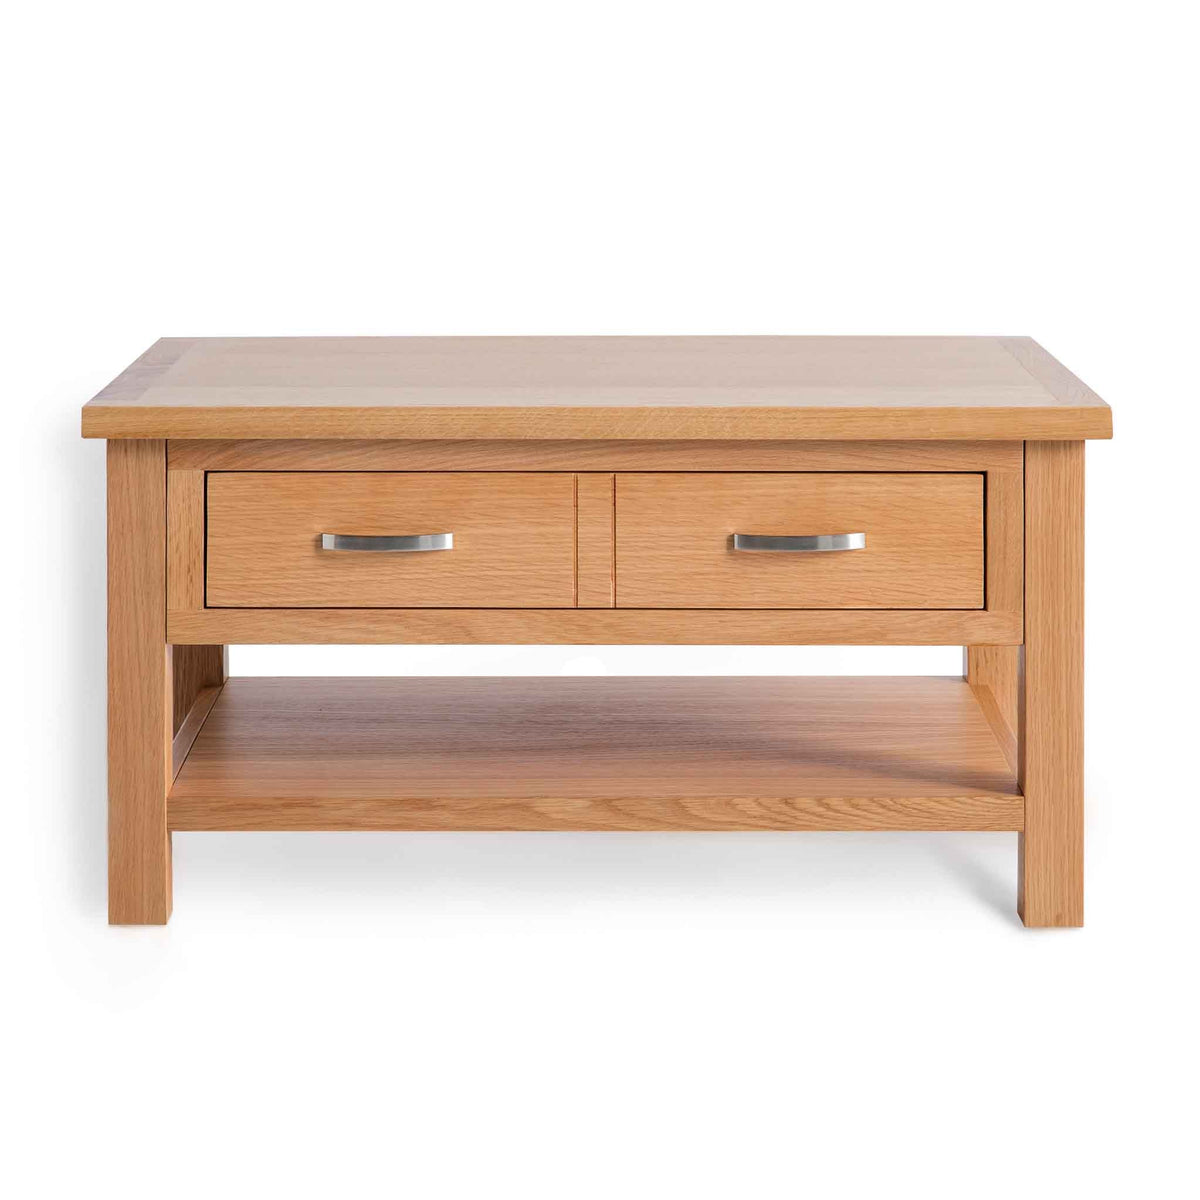 London Oak Coffee Table with Drawer by Roseland Furniture